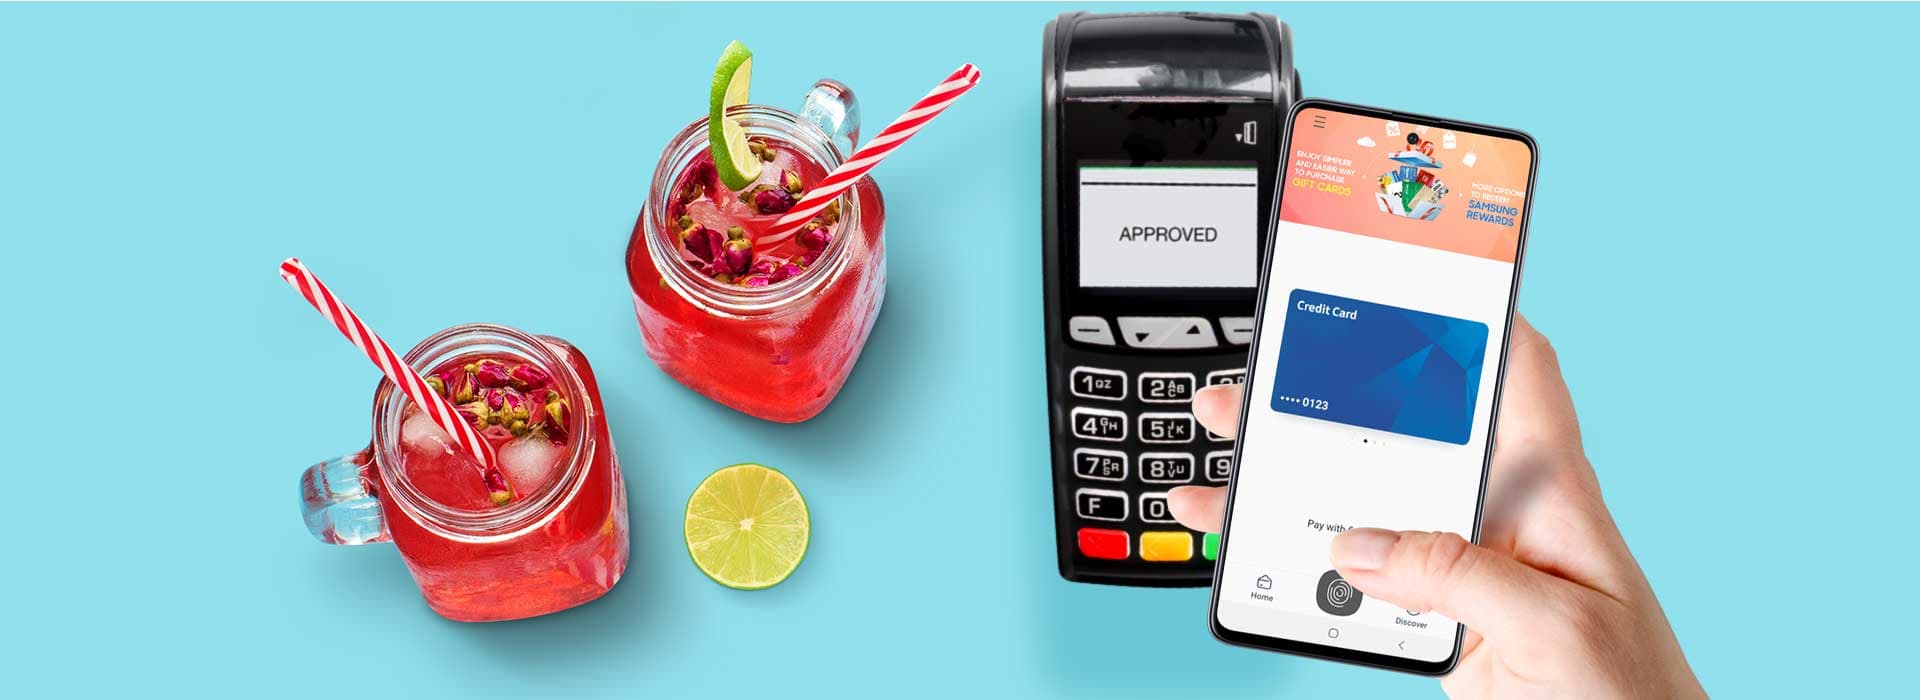 Secure with Samsung Knox & Samsung pay